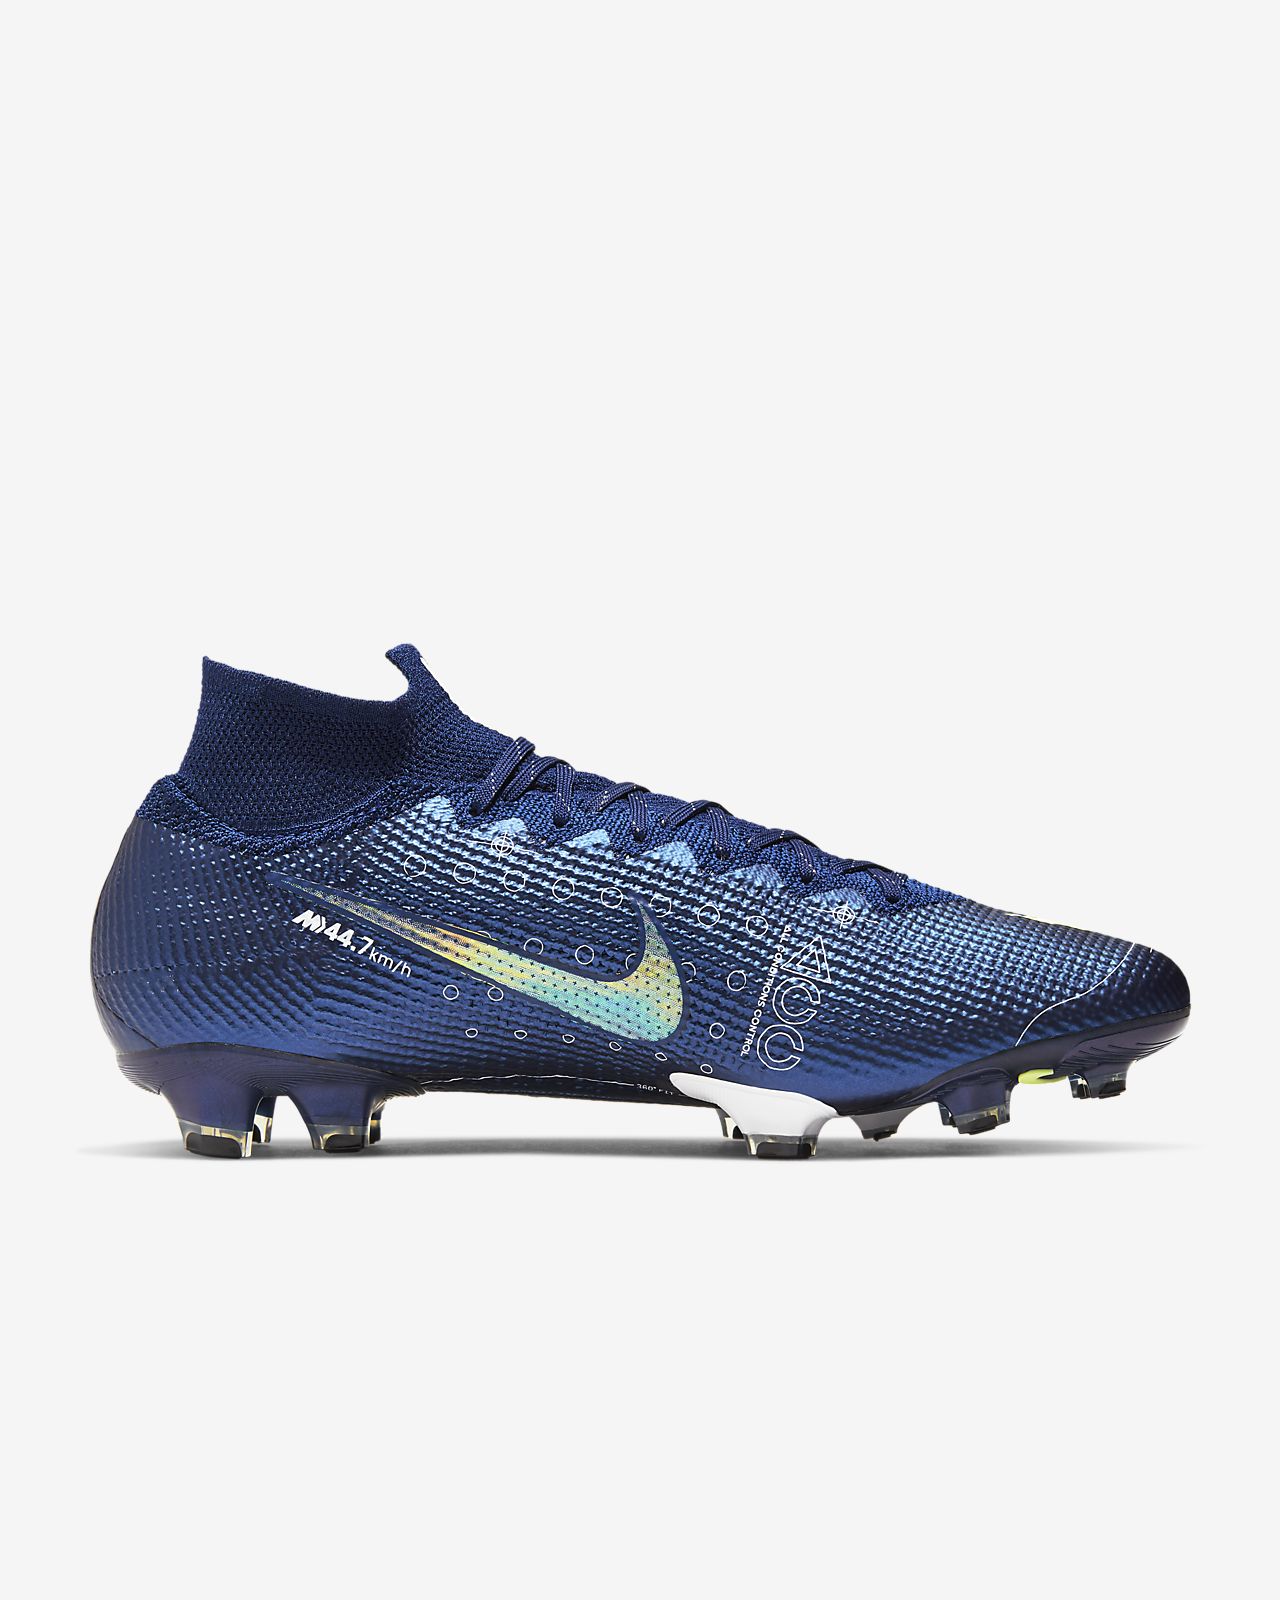 Nike Mercurial Superfly 6 Pro Firm Ground Soccer Cleats